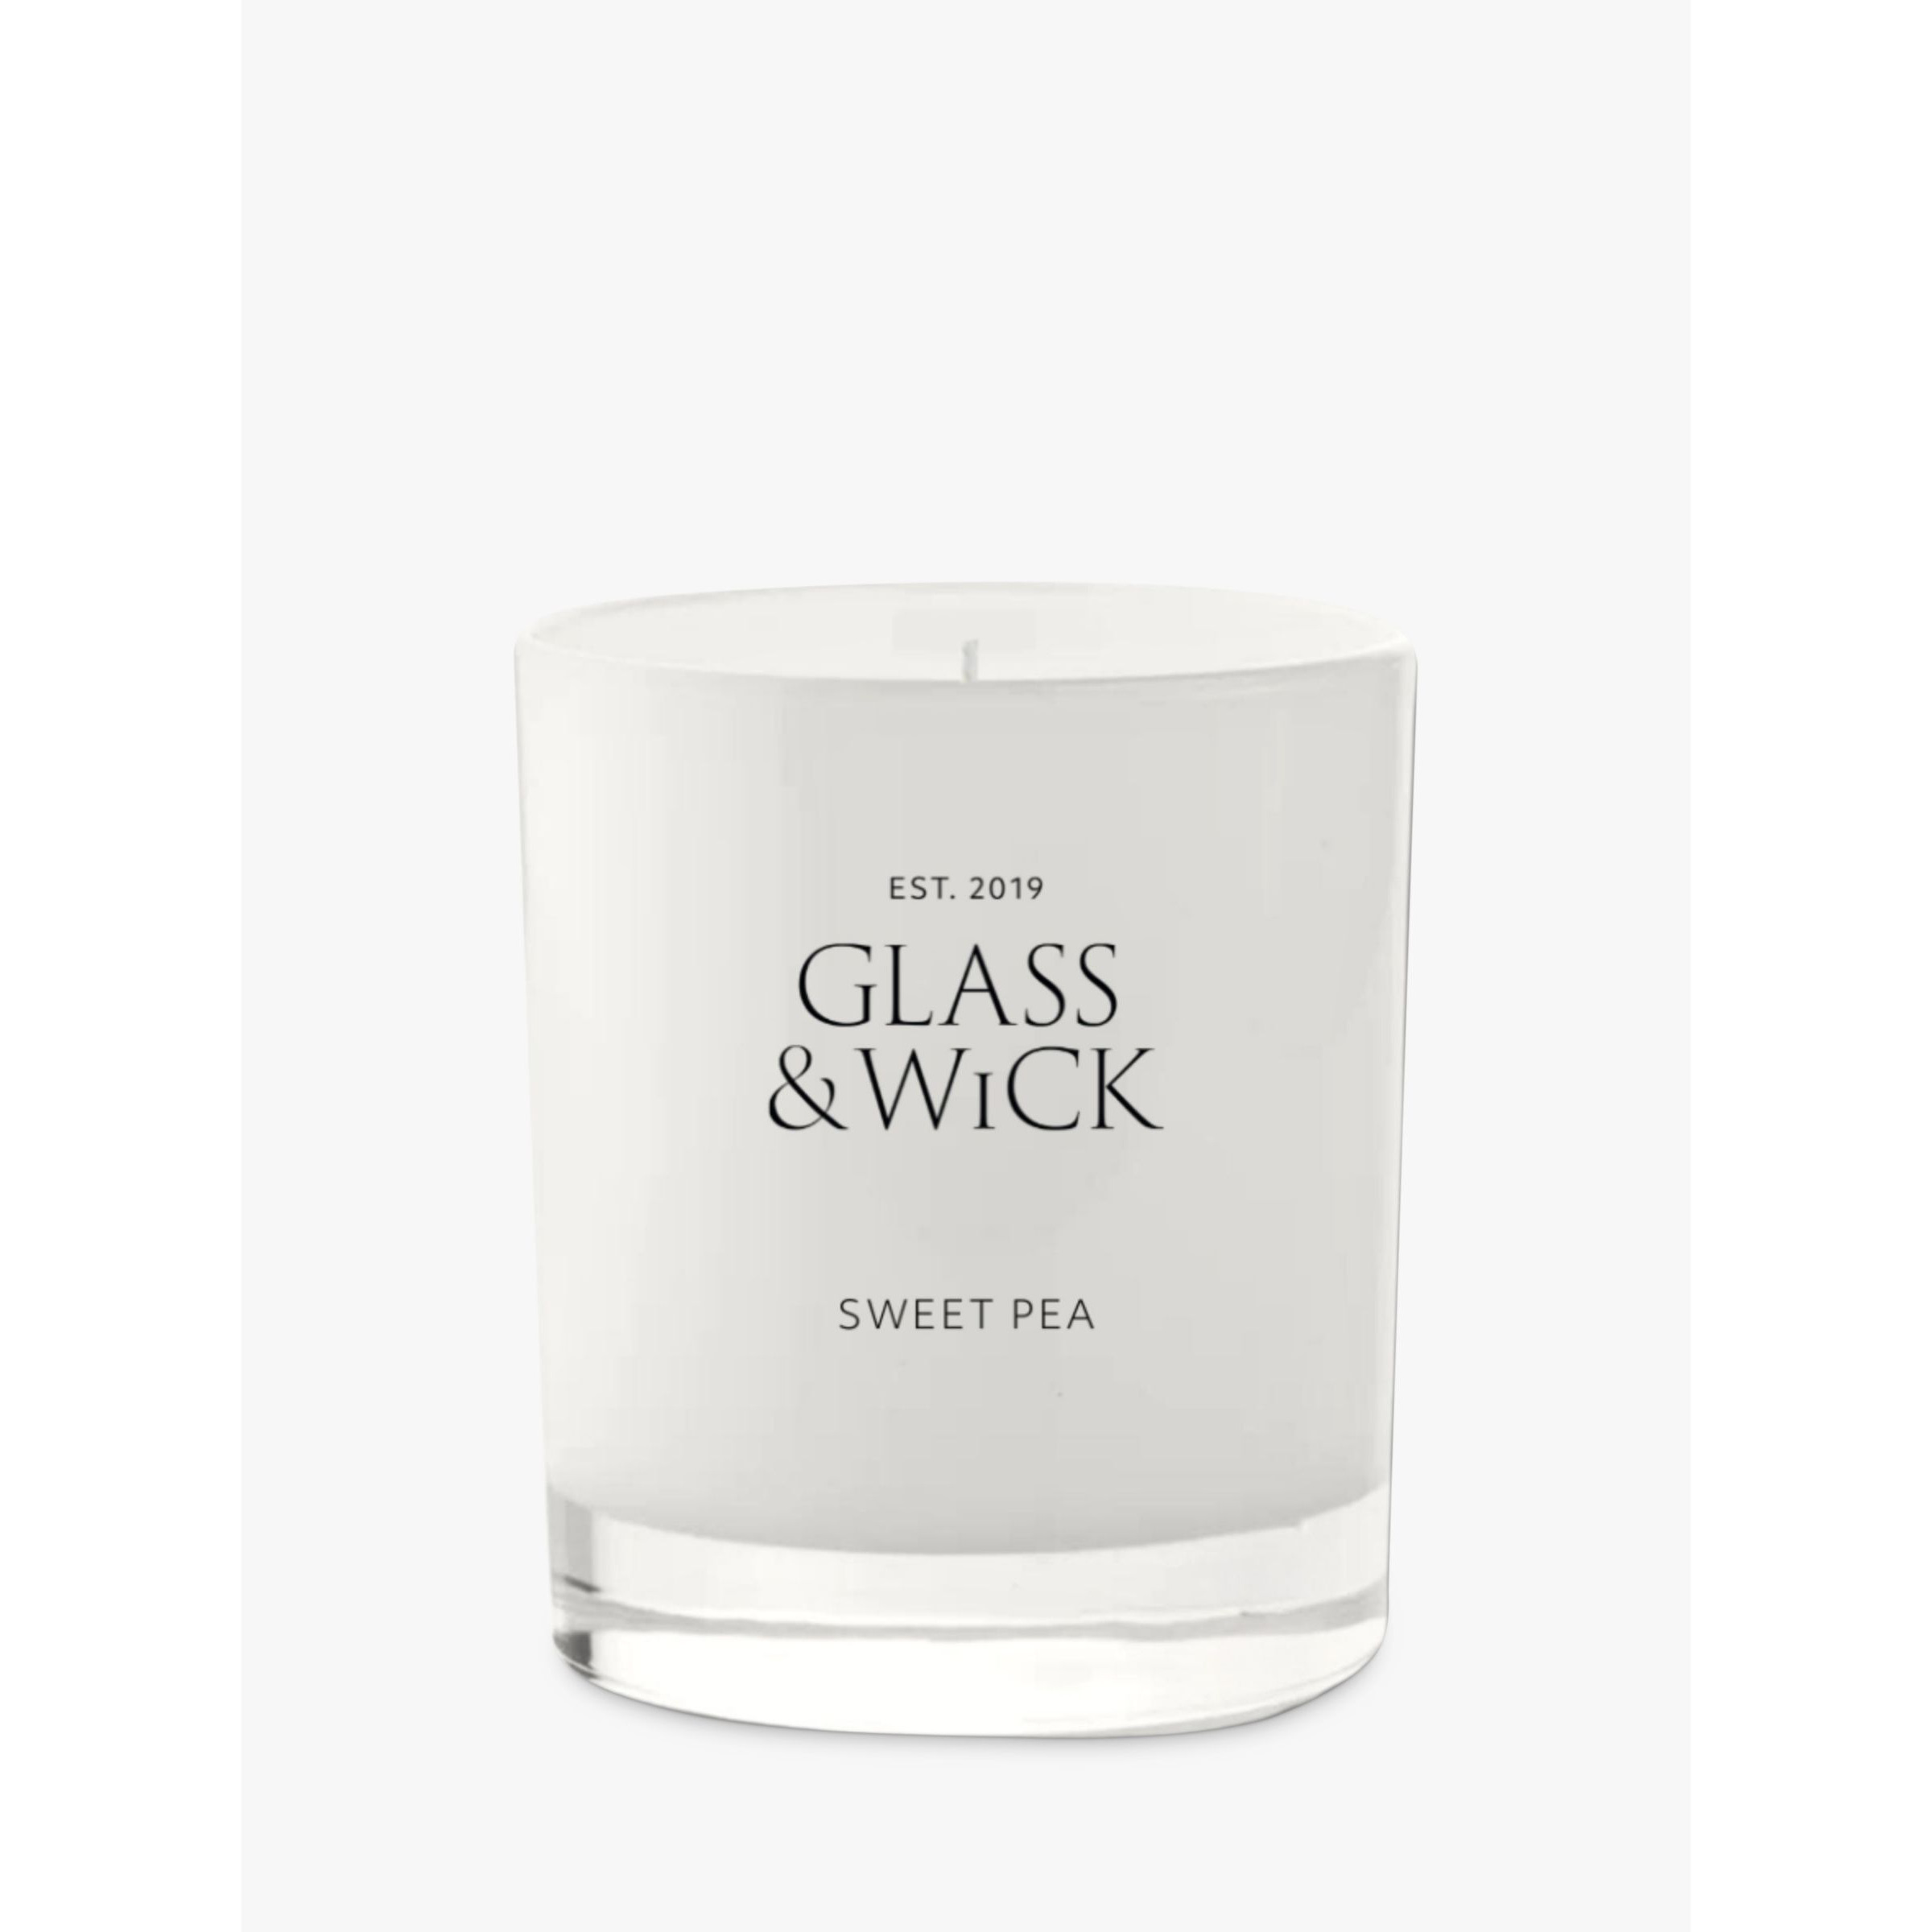 Glass & Wick Sweet Pea Scented Candle, 220g - image 1